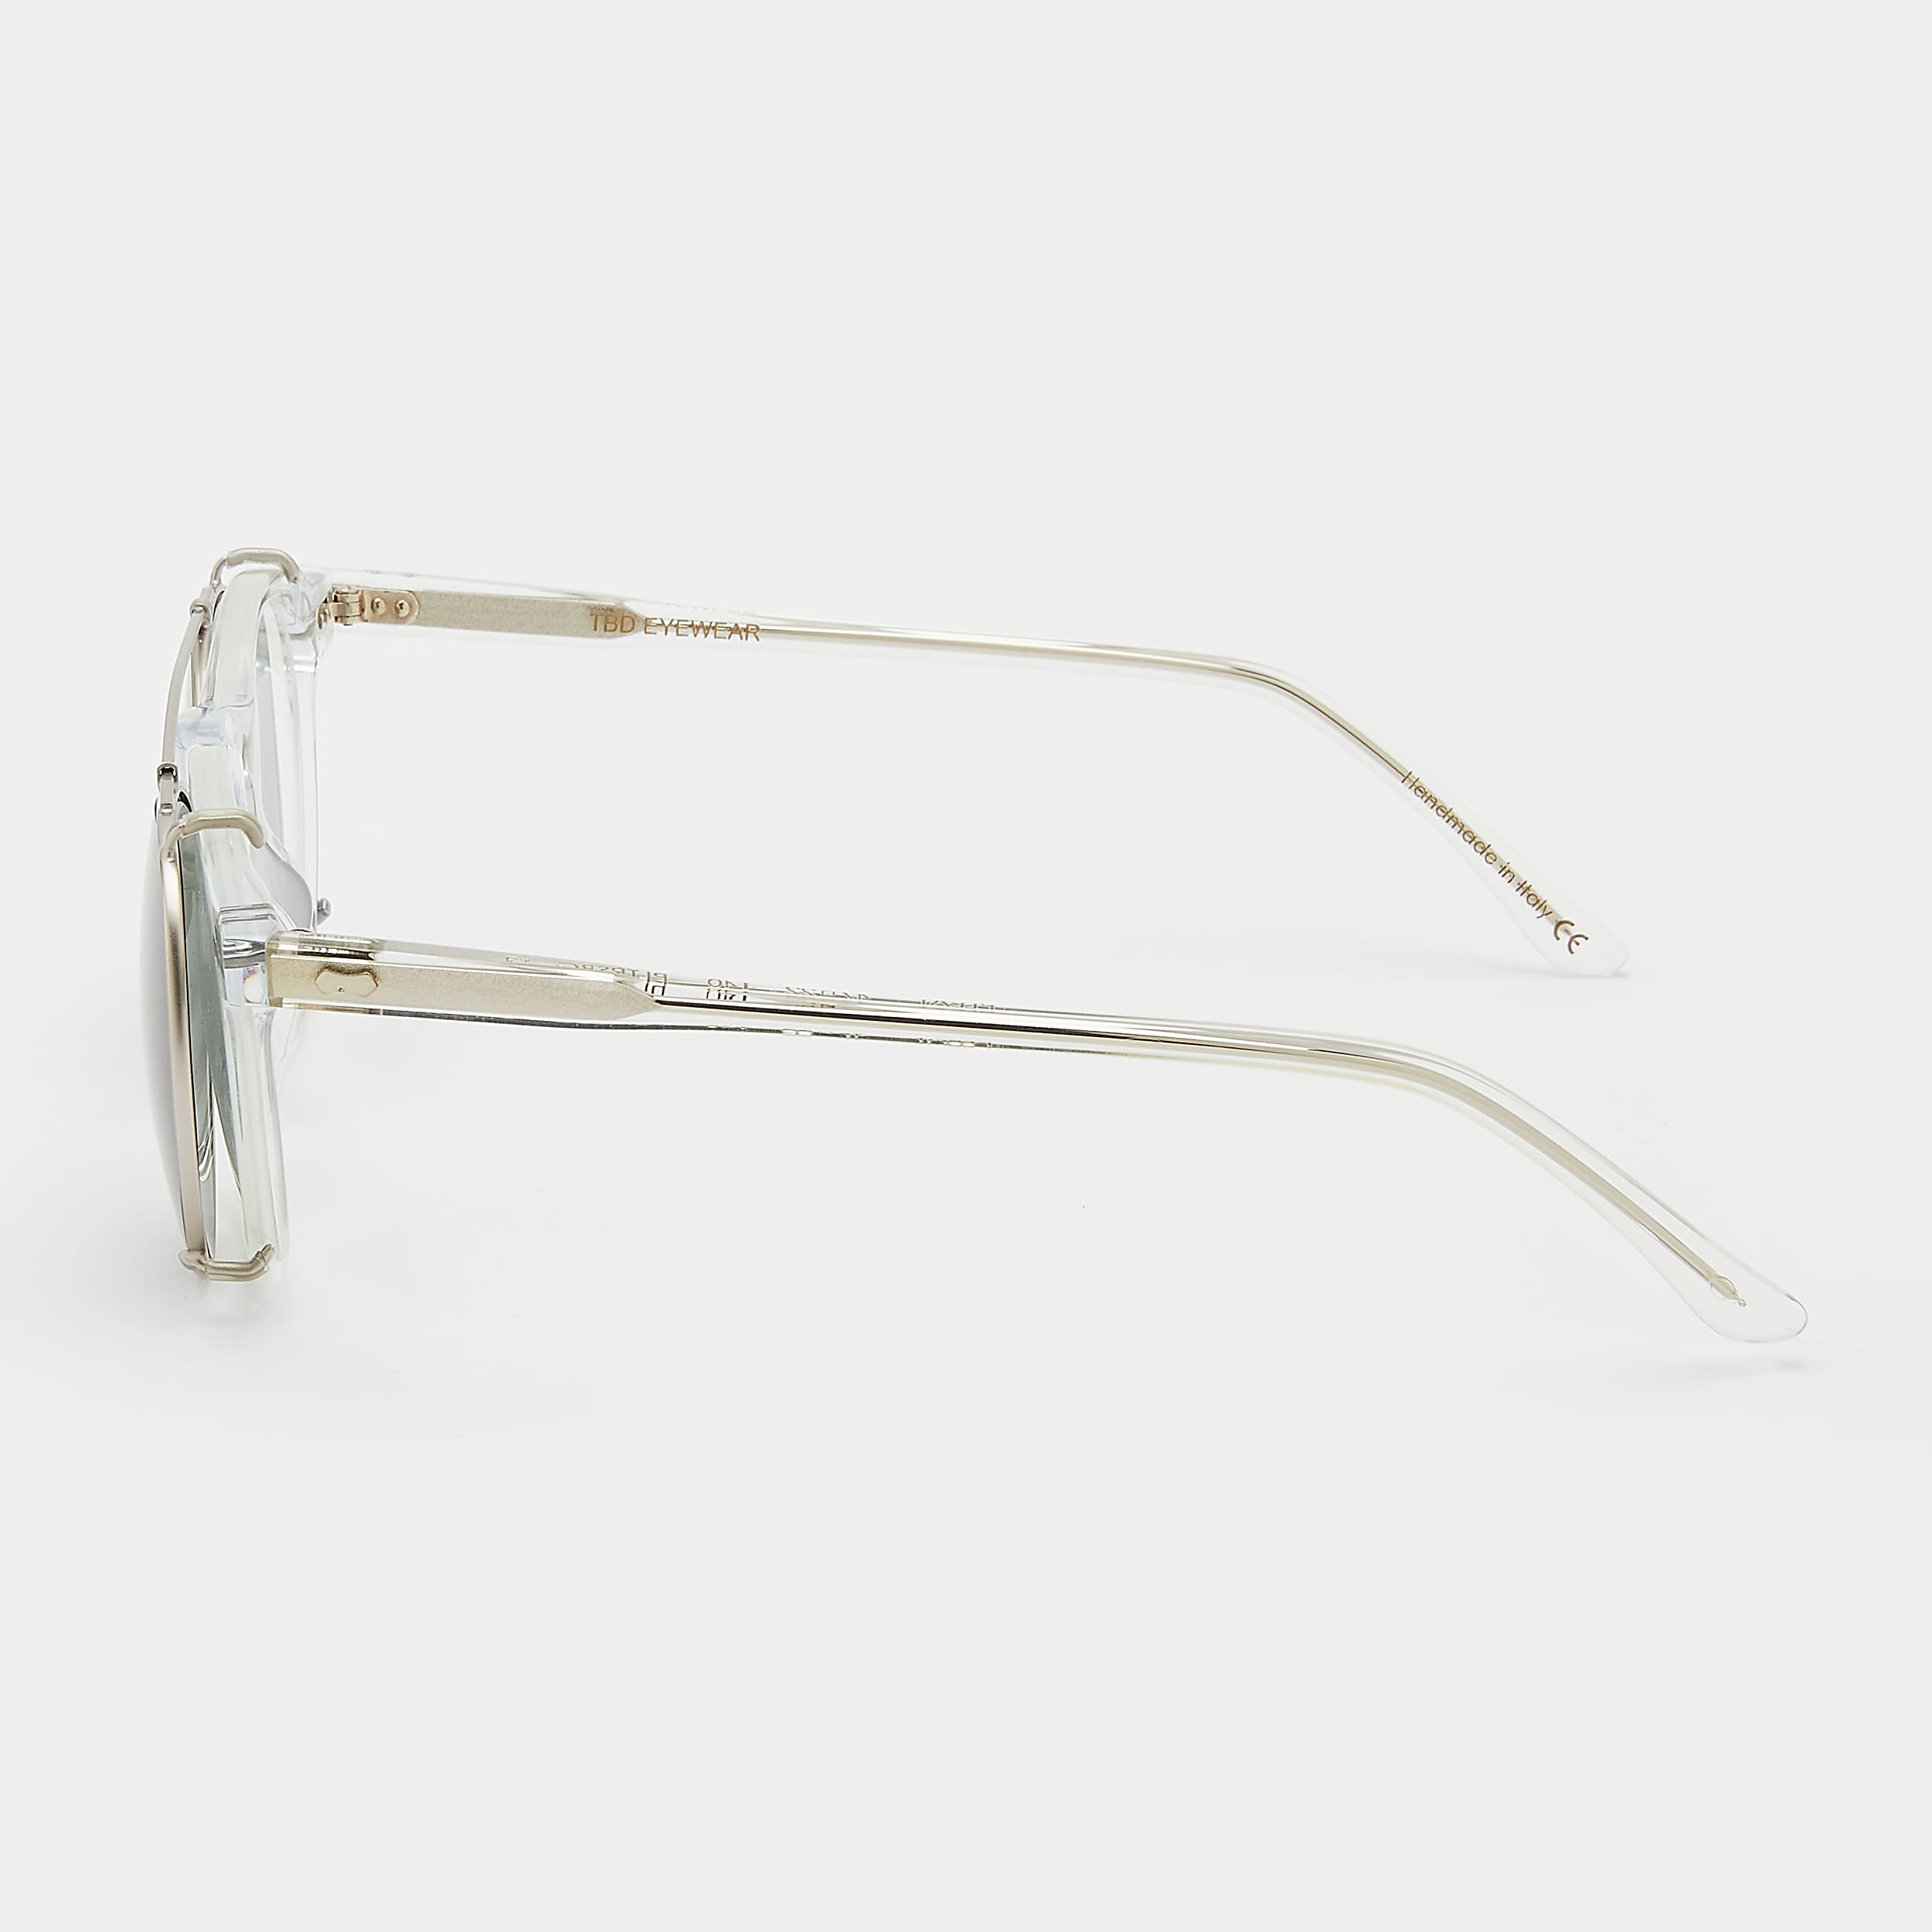 sunglasses-pleat-eco-transparent-silver-bottle-green-sustainable-tbd-eyewear-lateral